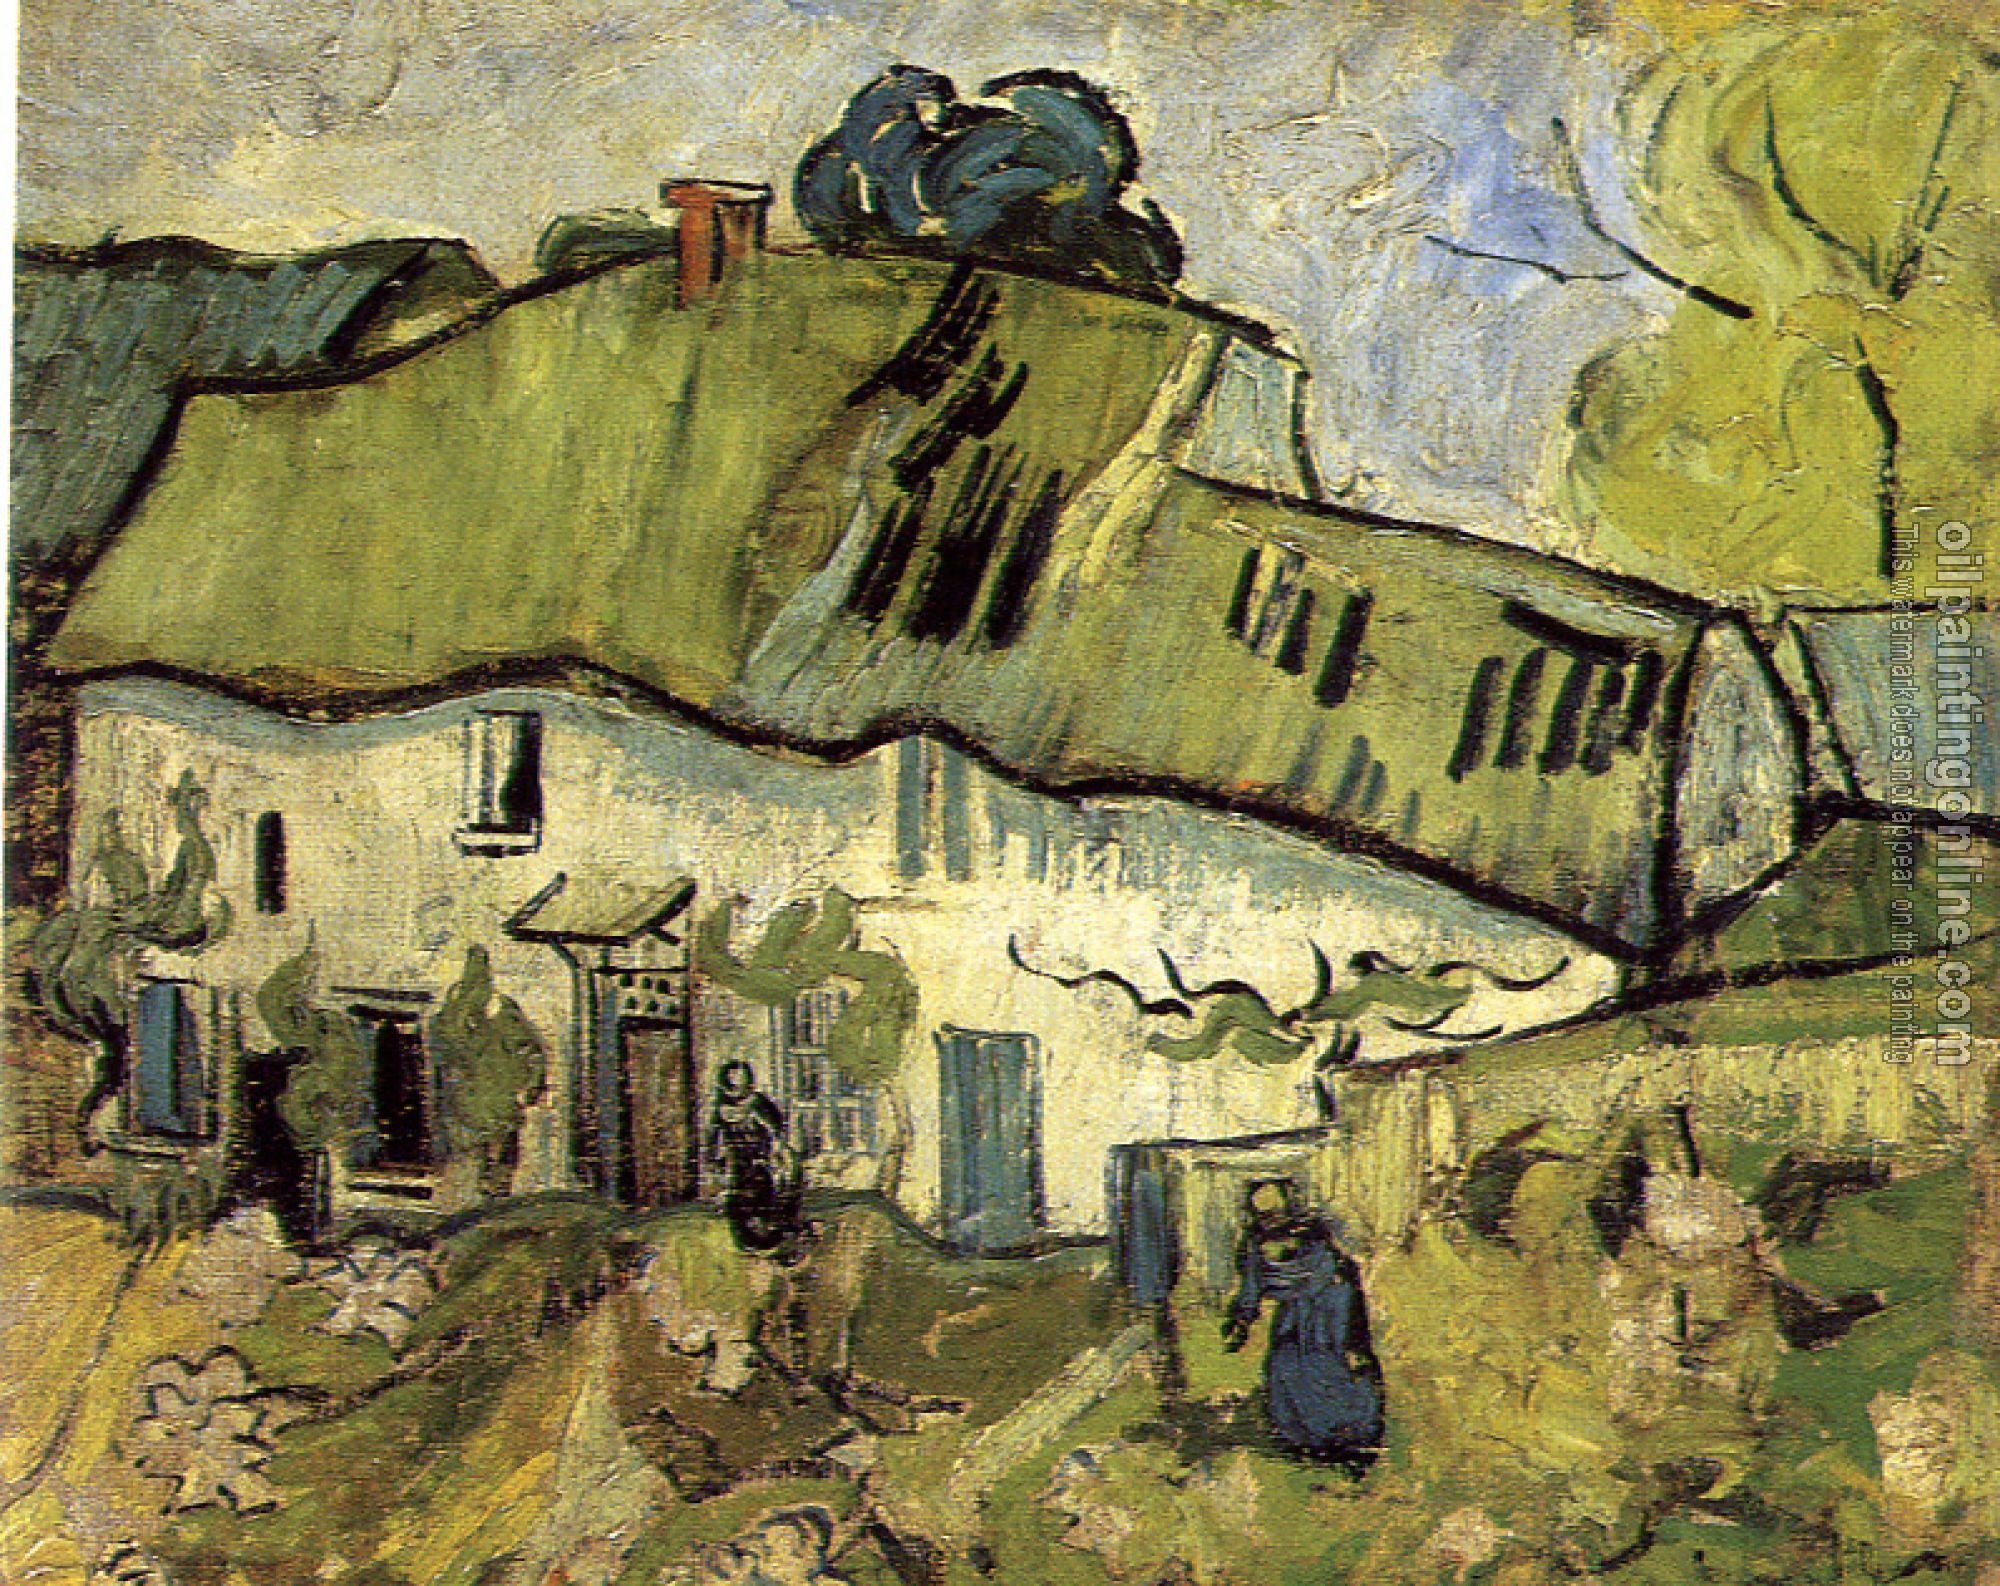 Gogh, Vincent van - A House and Two Figures